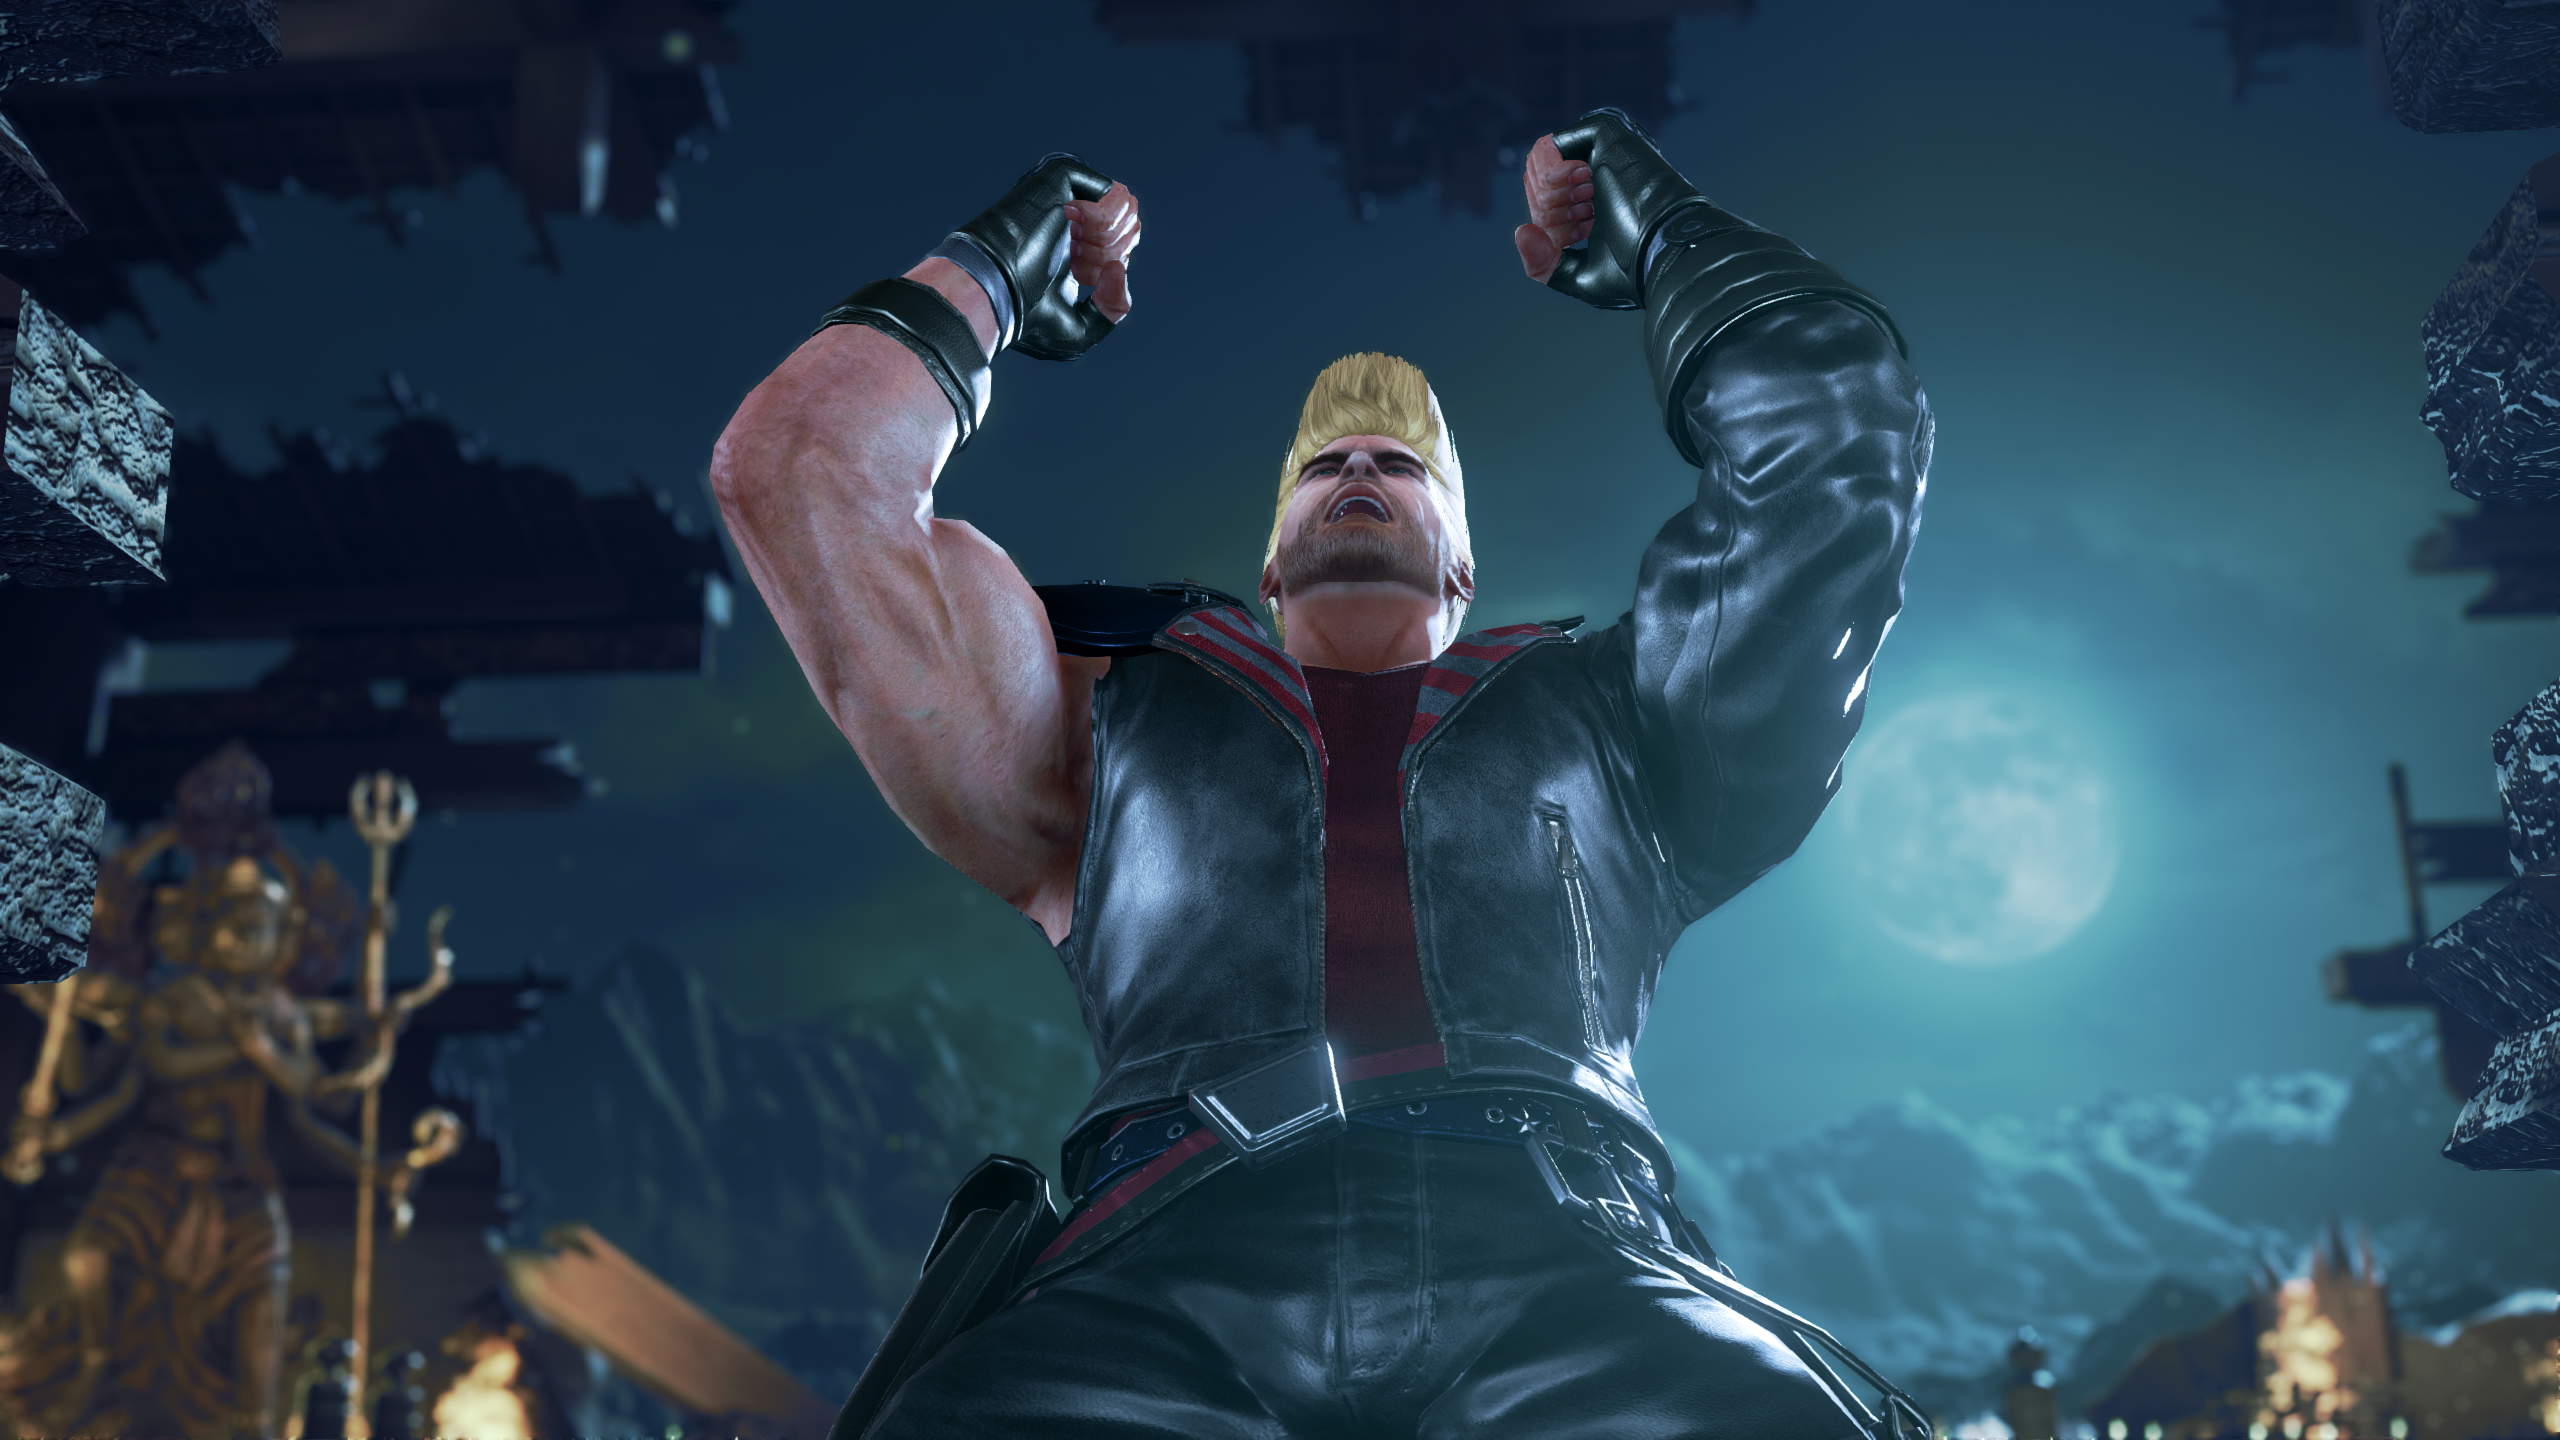 Tekken 7 Testing Reveals Two New Characters, Rage Arts, and More